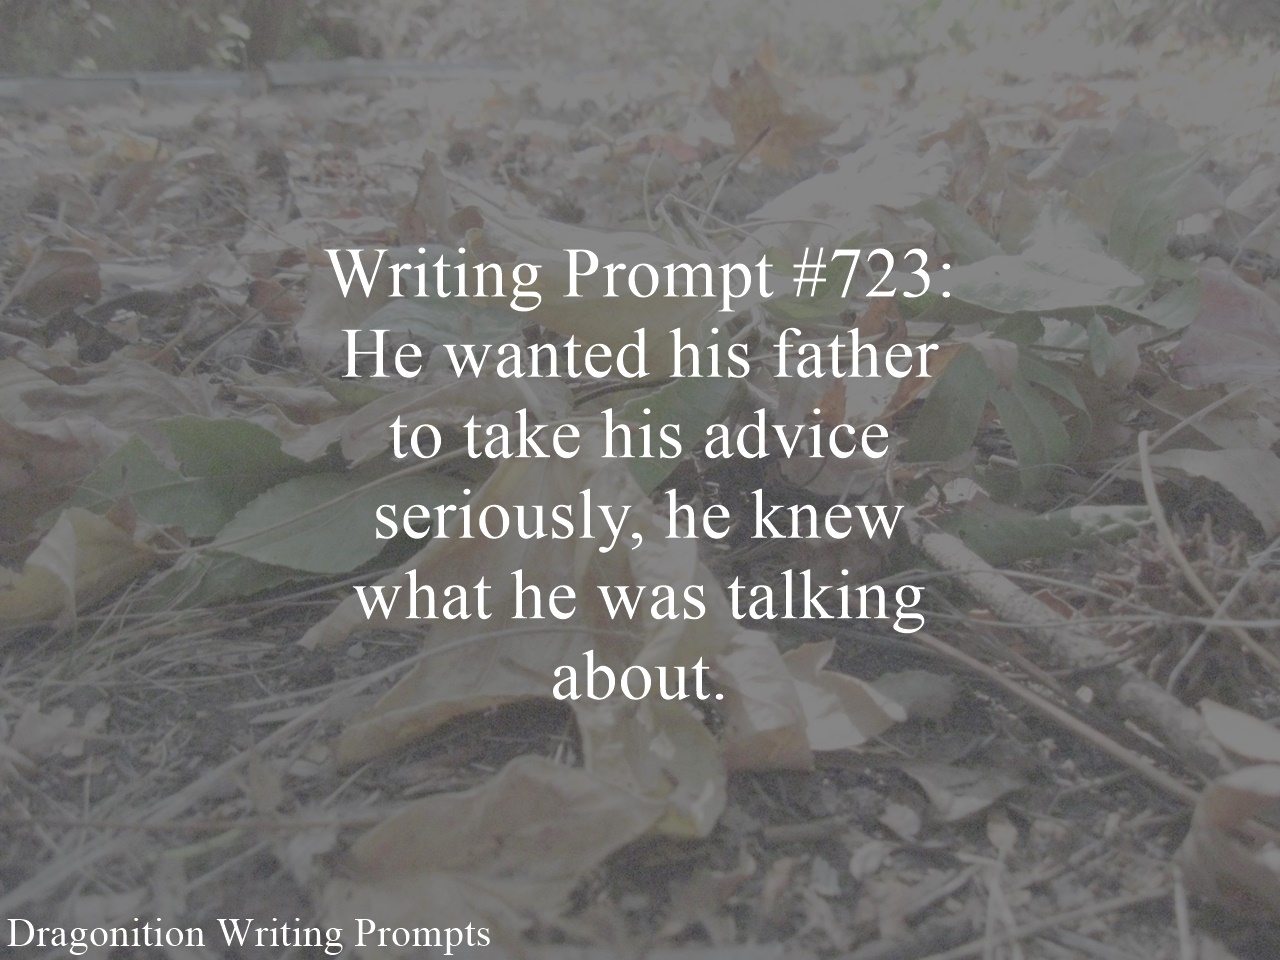 Writing Prompt Dragonition 723